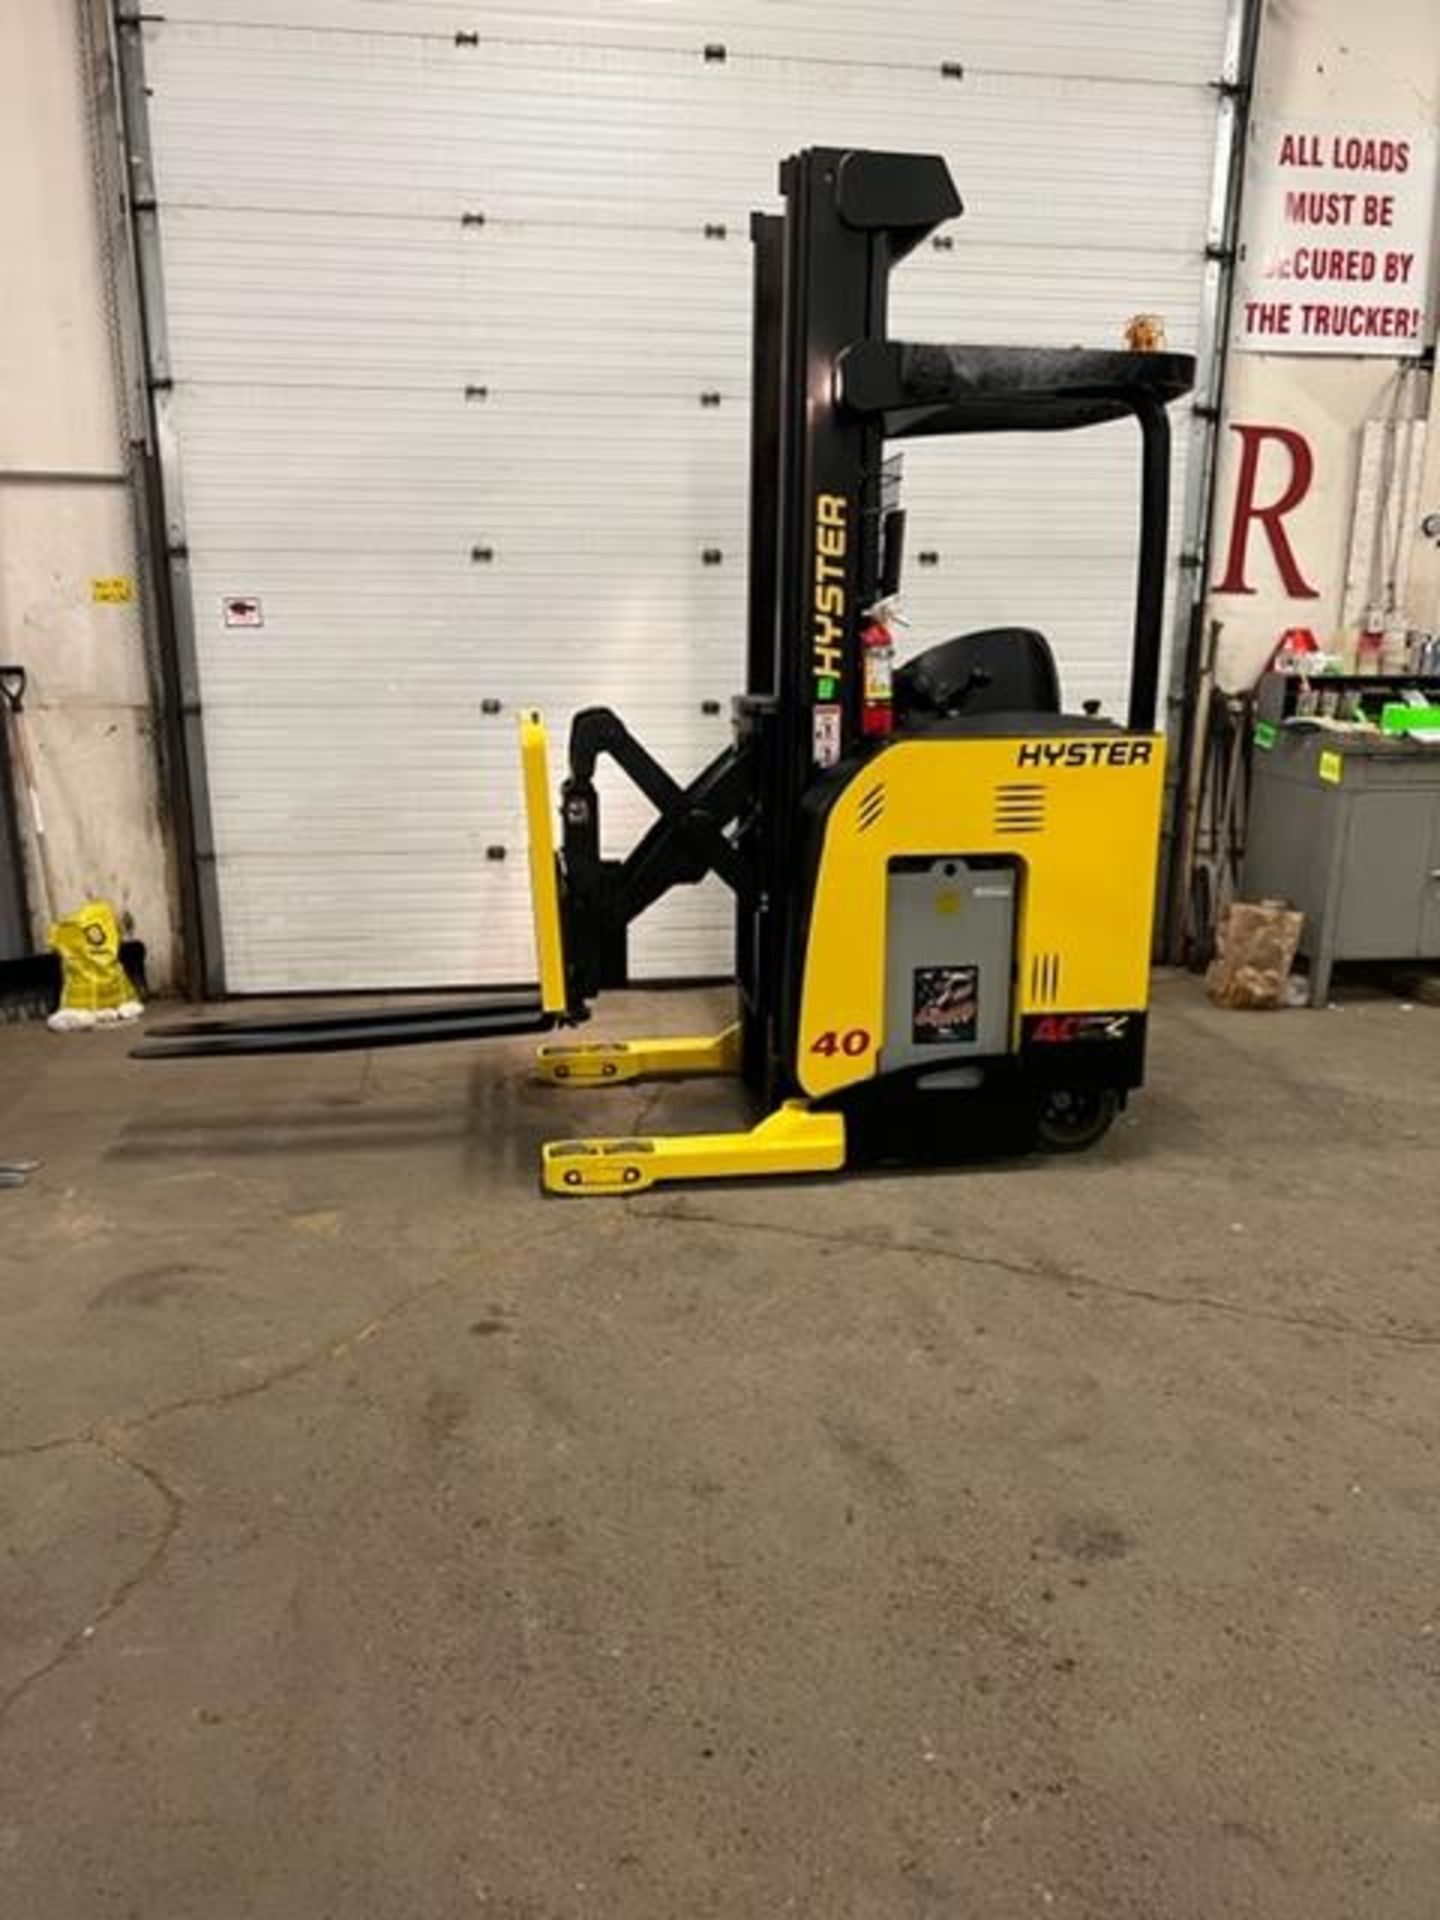 FREE CUSTOMS - 2011 Hyster Reach Truck Pallet Lifter REACH TRUCK 4000lbs capacity electric NICE